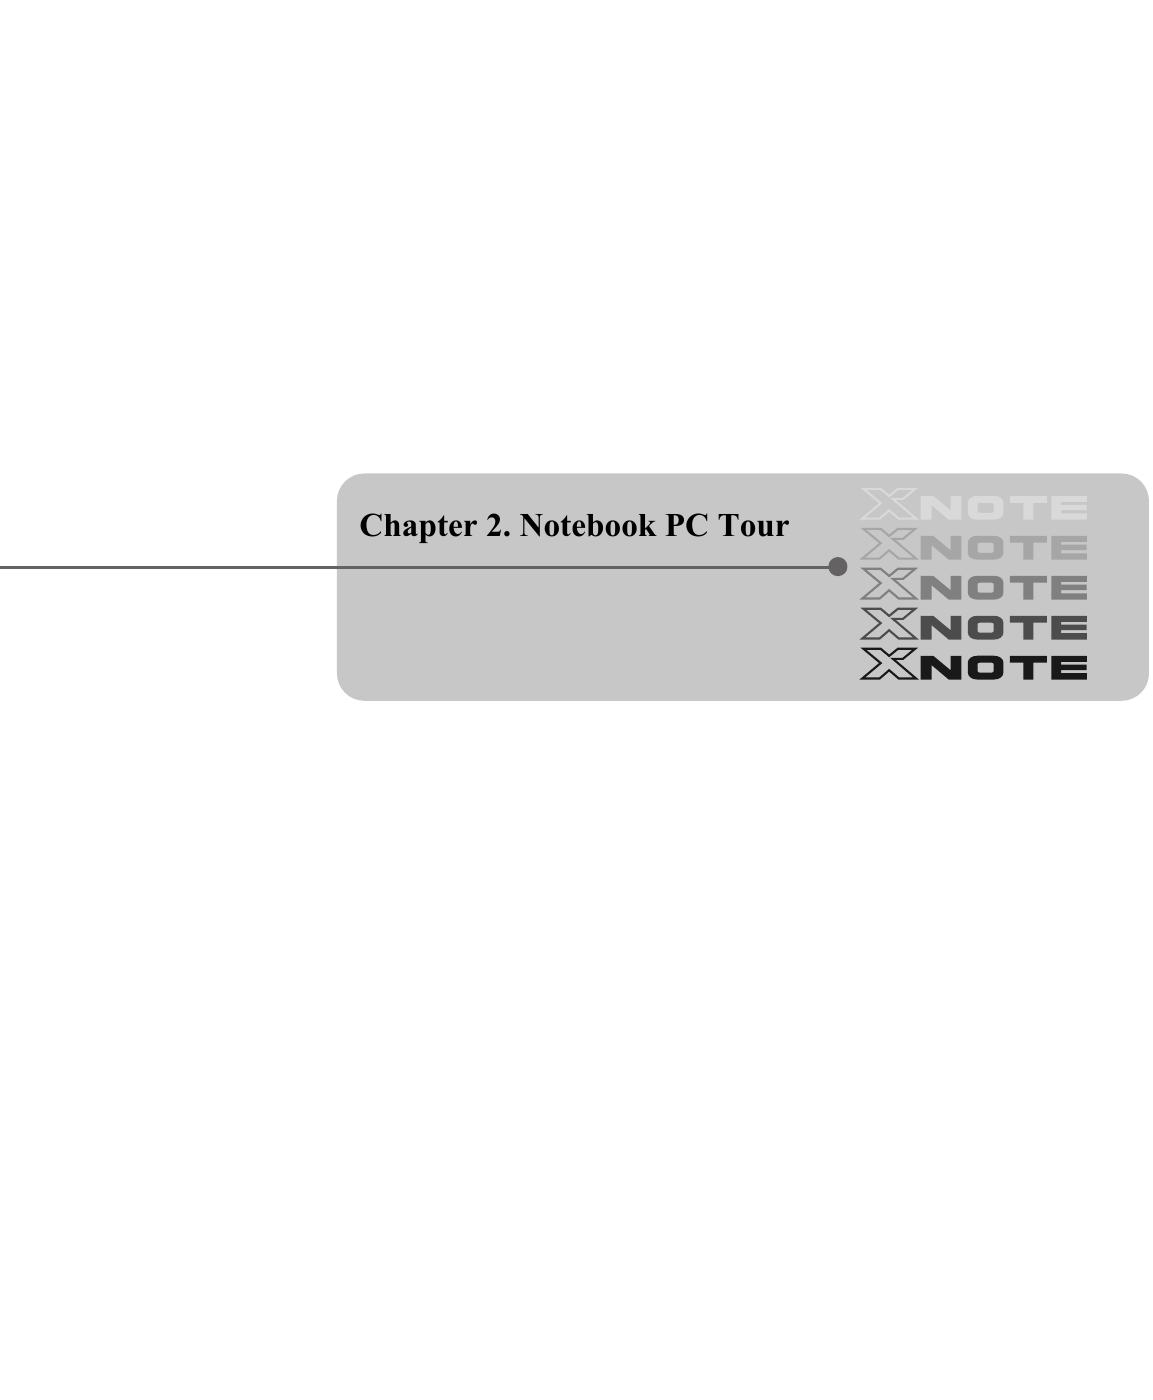 Chapter 2. Notebook PC Tour